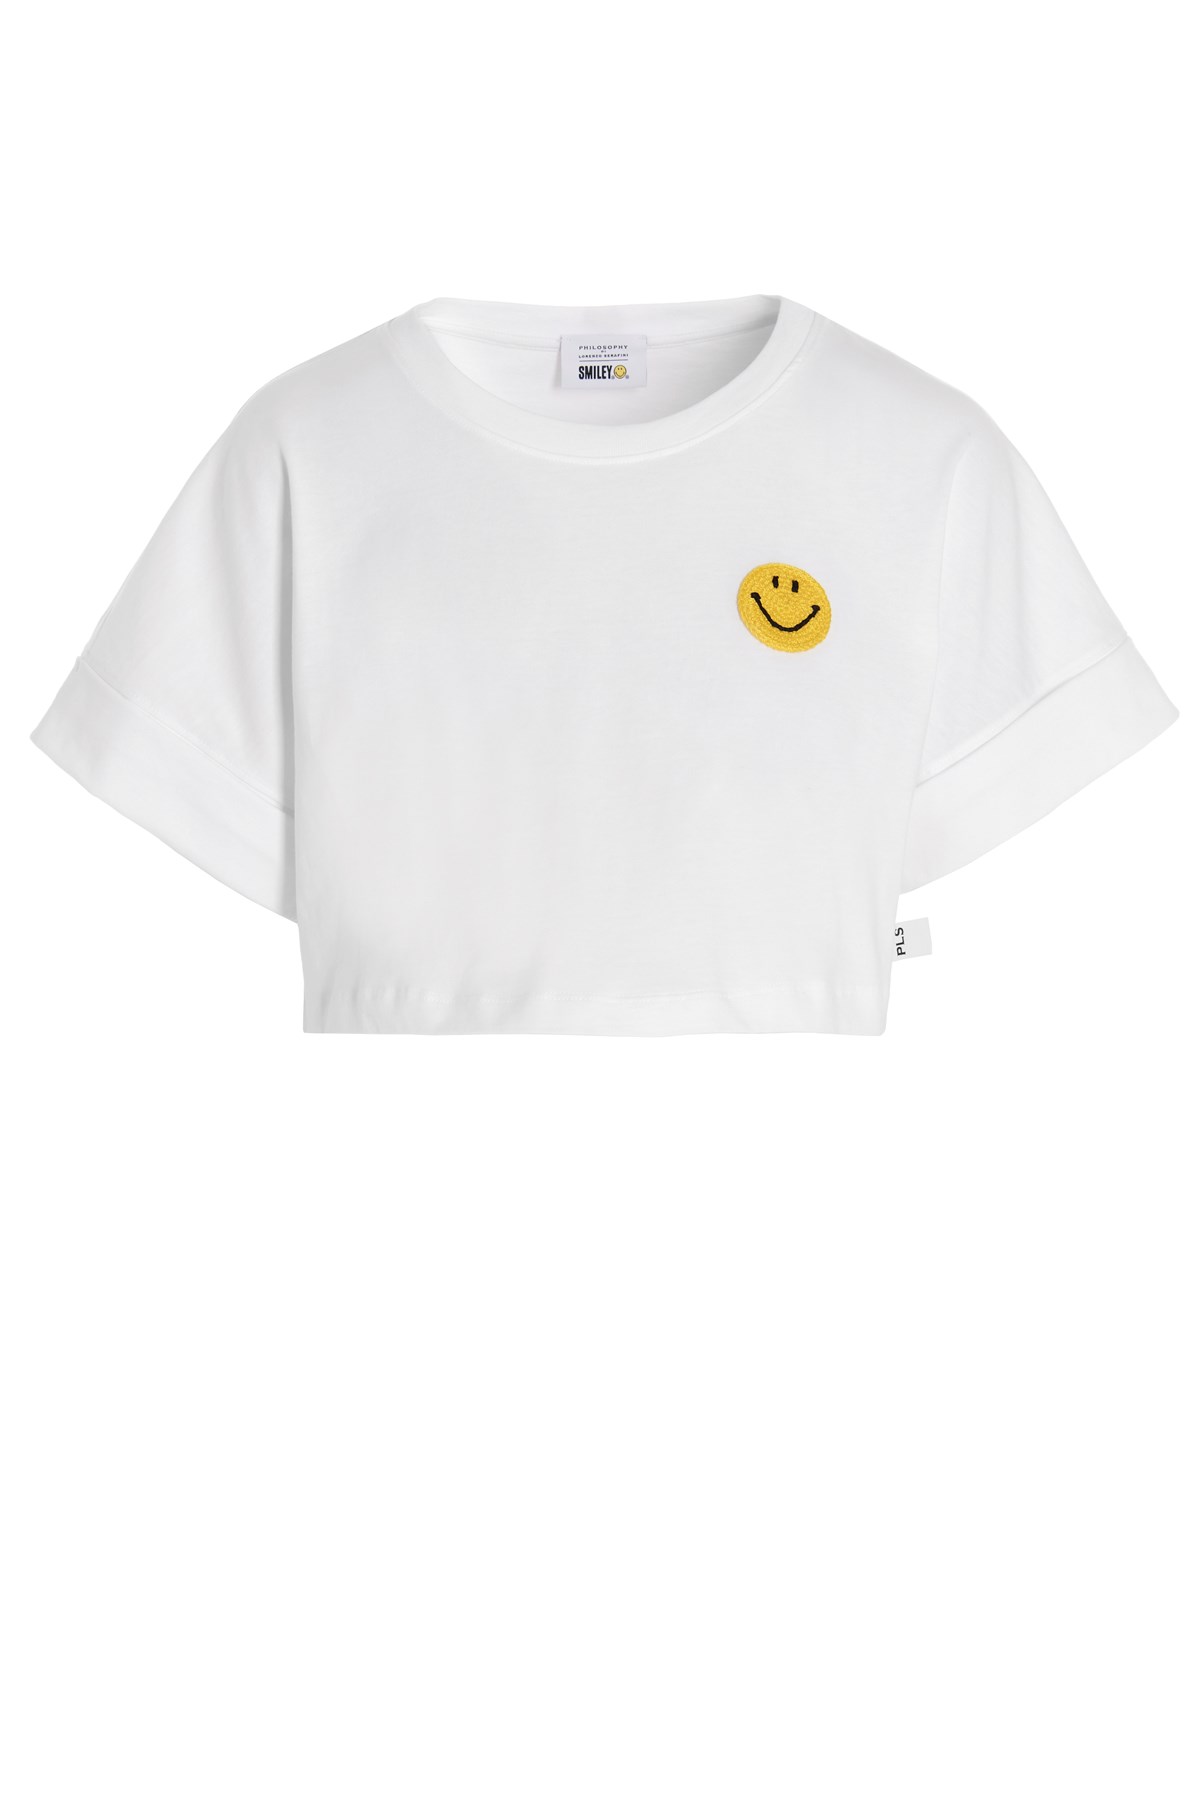 PHILOSOPHY 'Take The Time To Smile’ Capsule T-Shirt